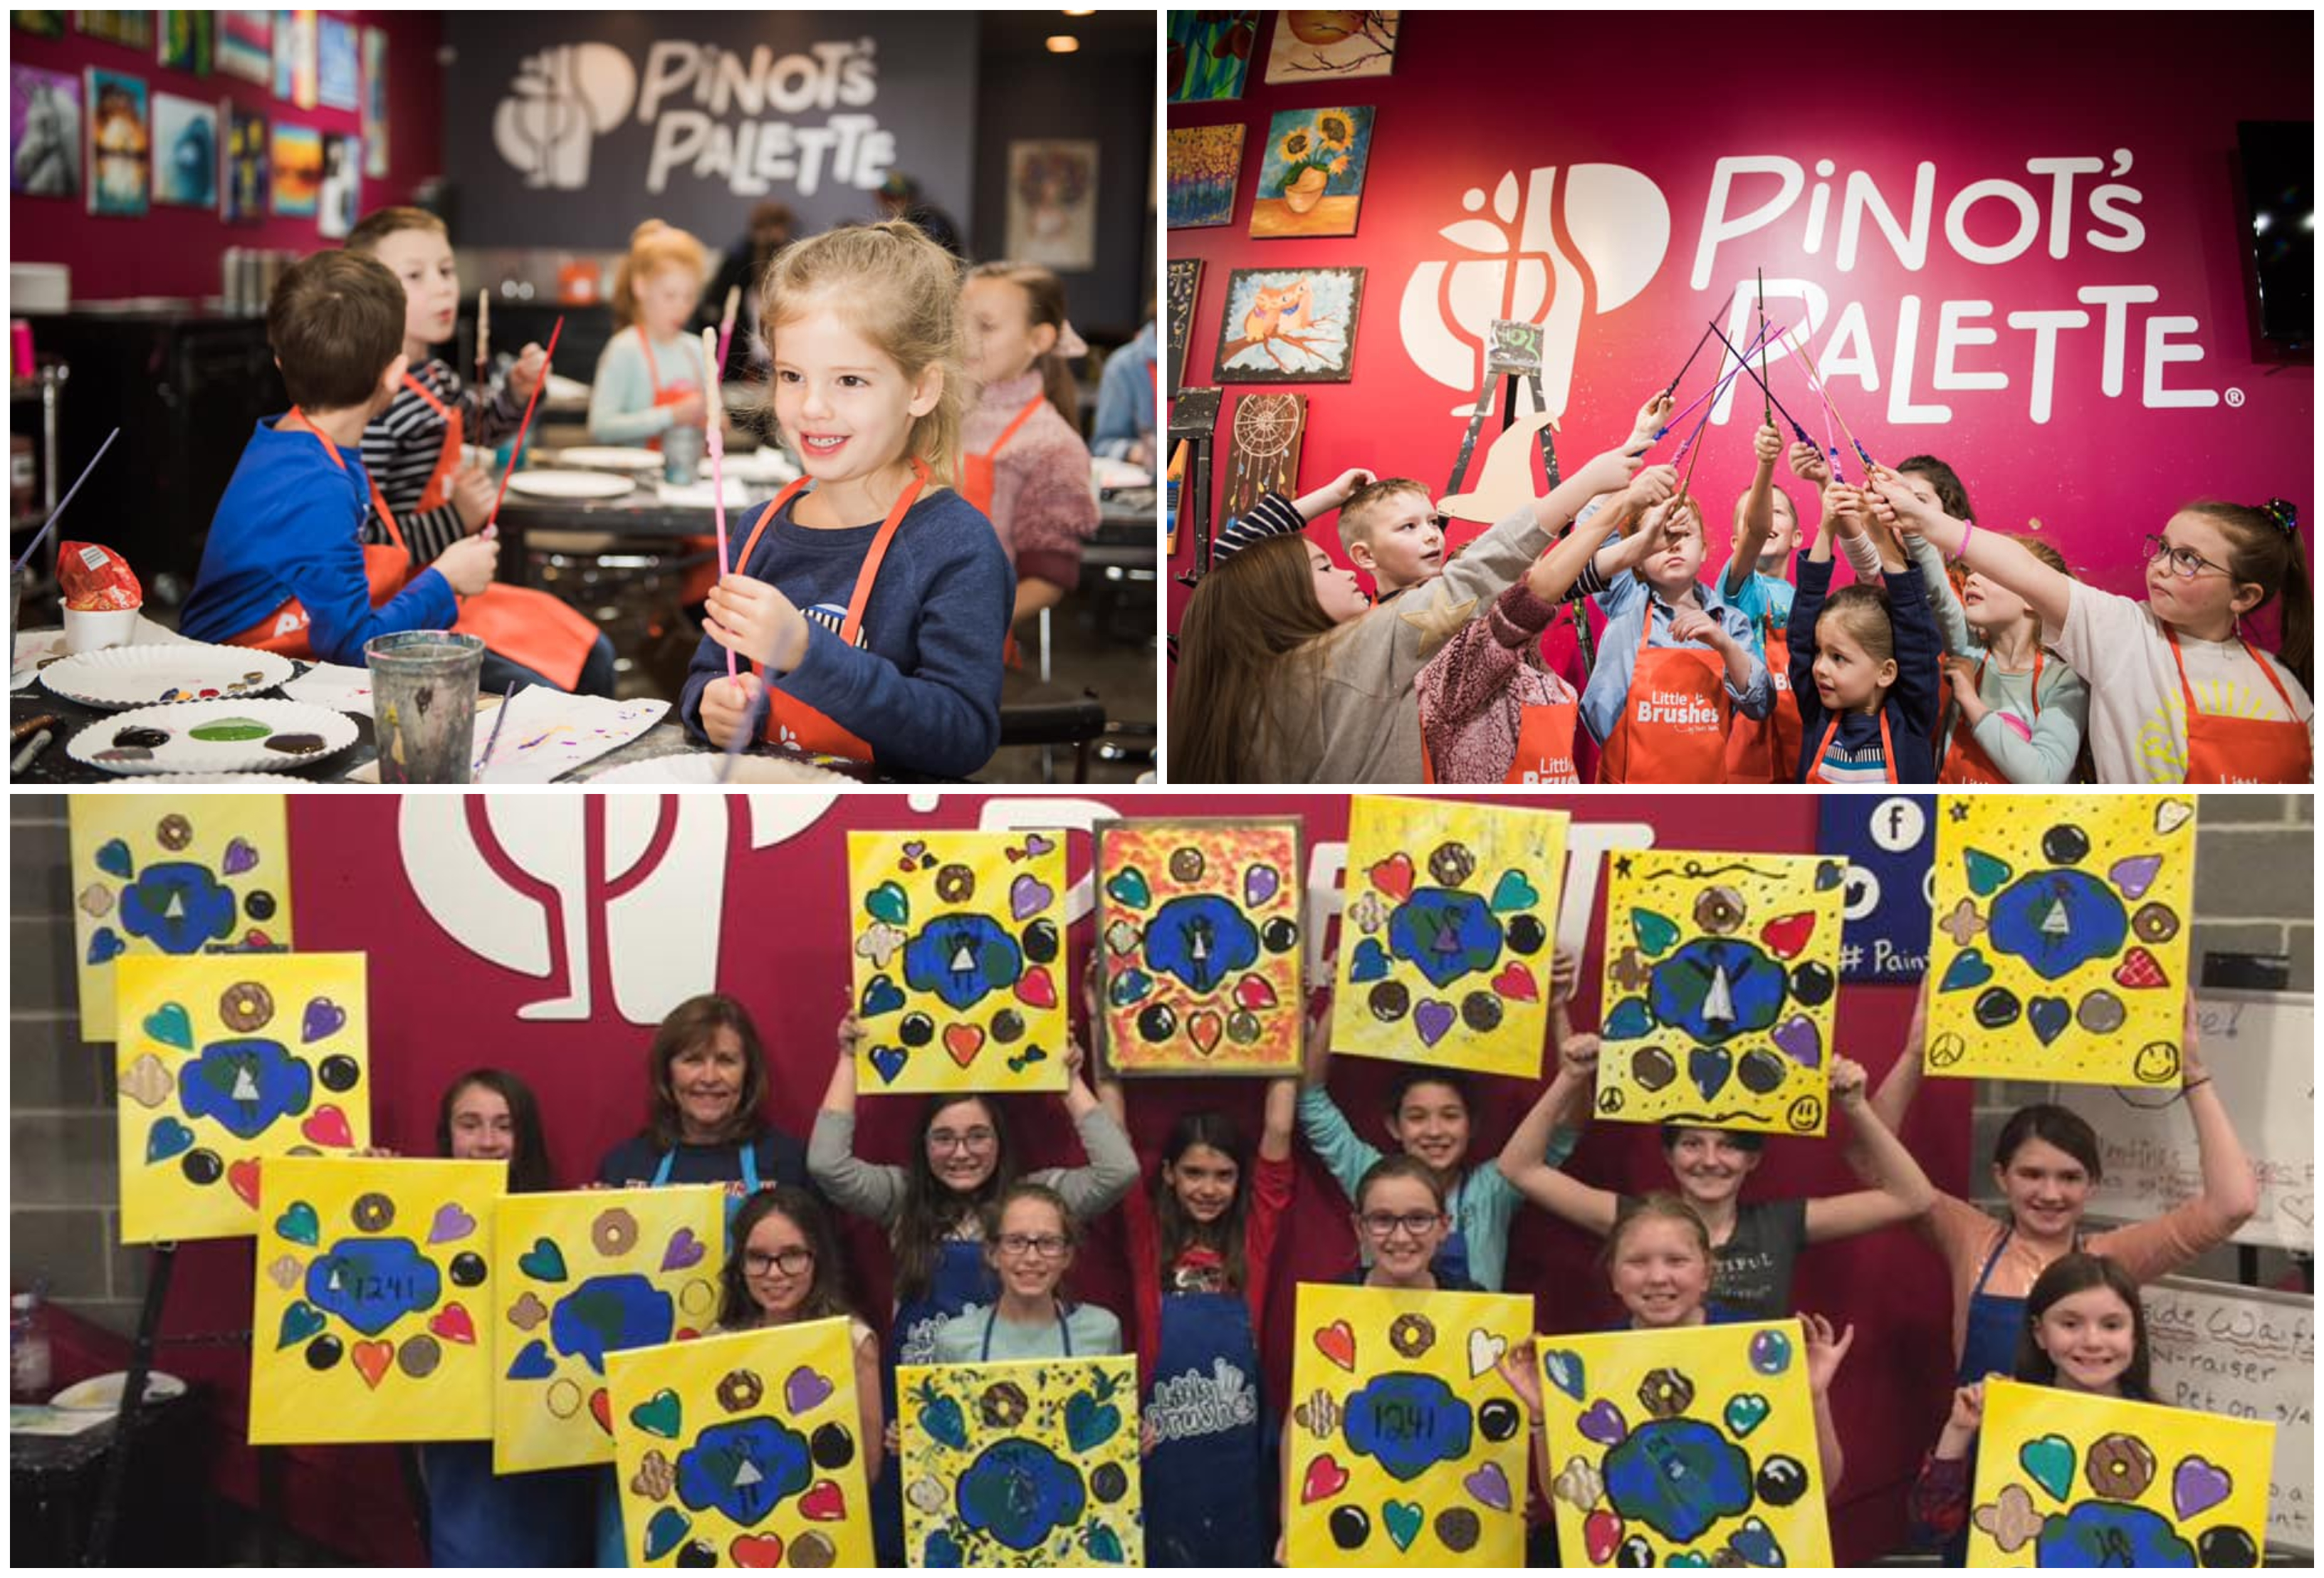 Creative Summertime Arts & Crafts For The Kids! - Pinot's Palette